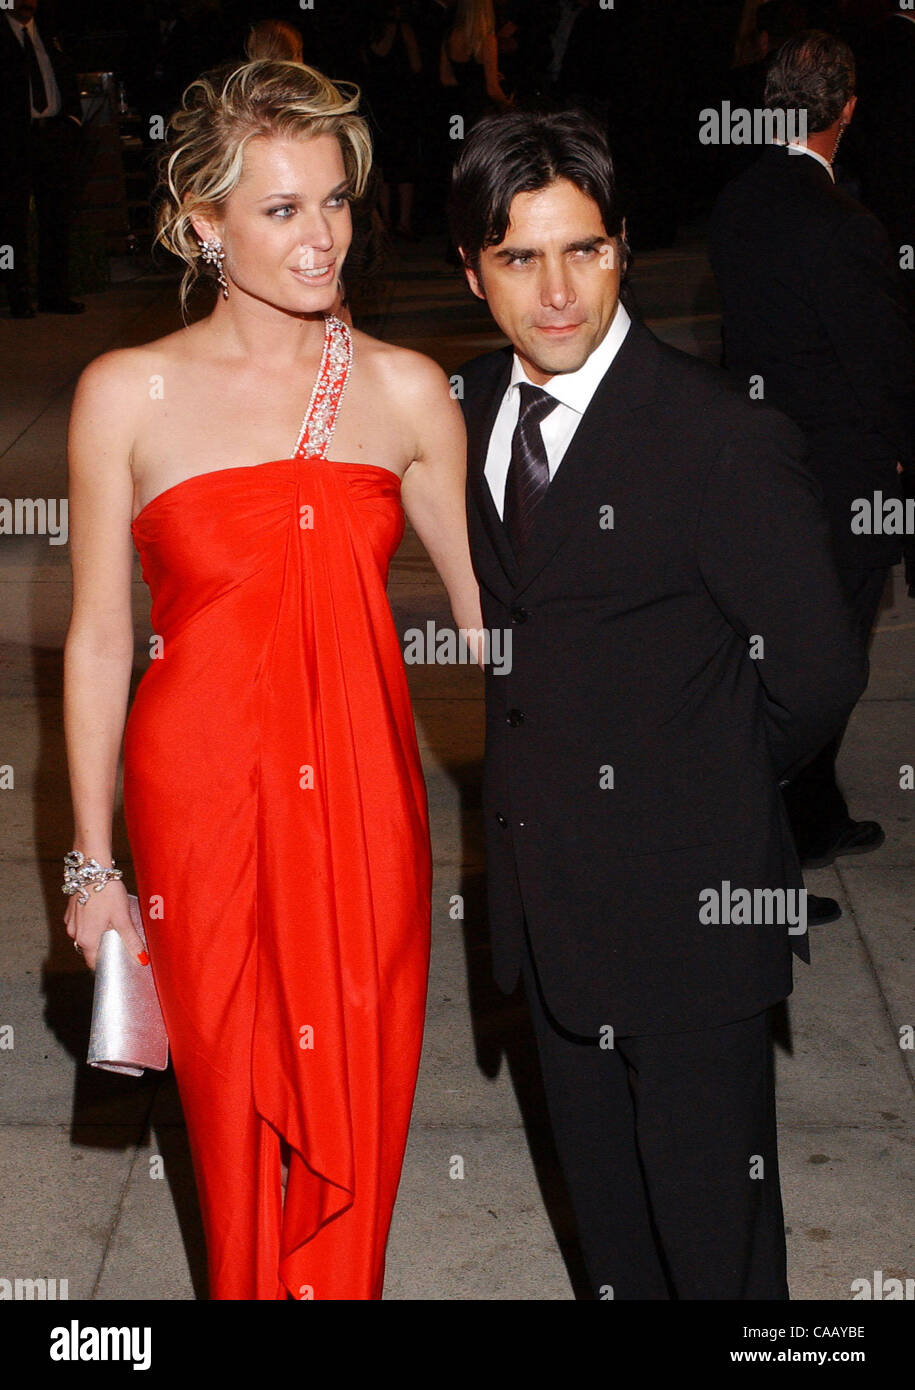 Feb 29, 2004; Los Angeles, CA, USA; Actor JOHN STAMOS and wife, actress REBECCA ROMIJN, arrive at the 2004 Vanity Fair Oscar Party at Morton's in West Hollywood. Stock Photo